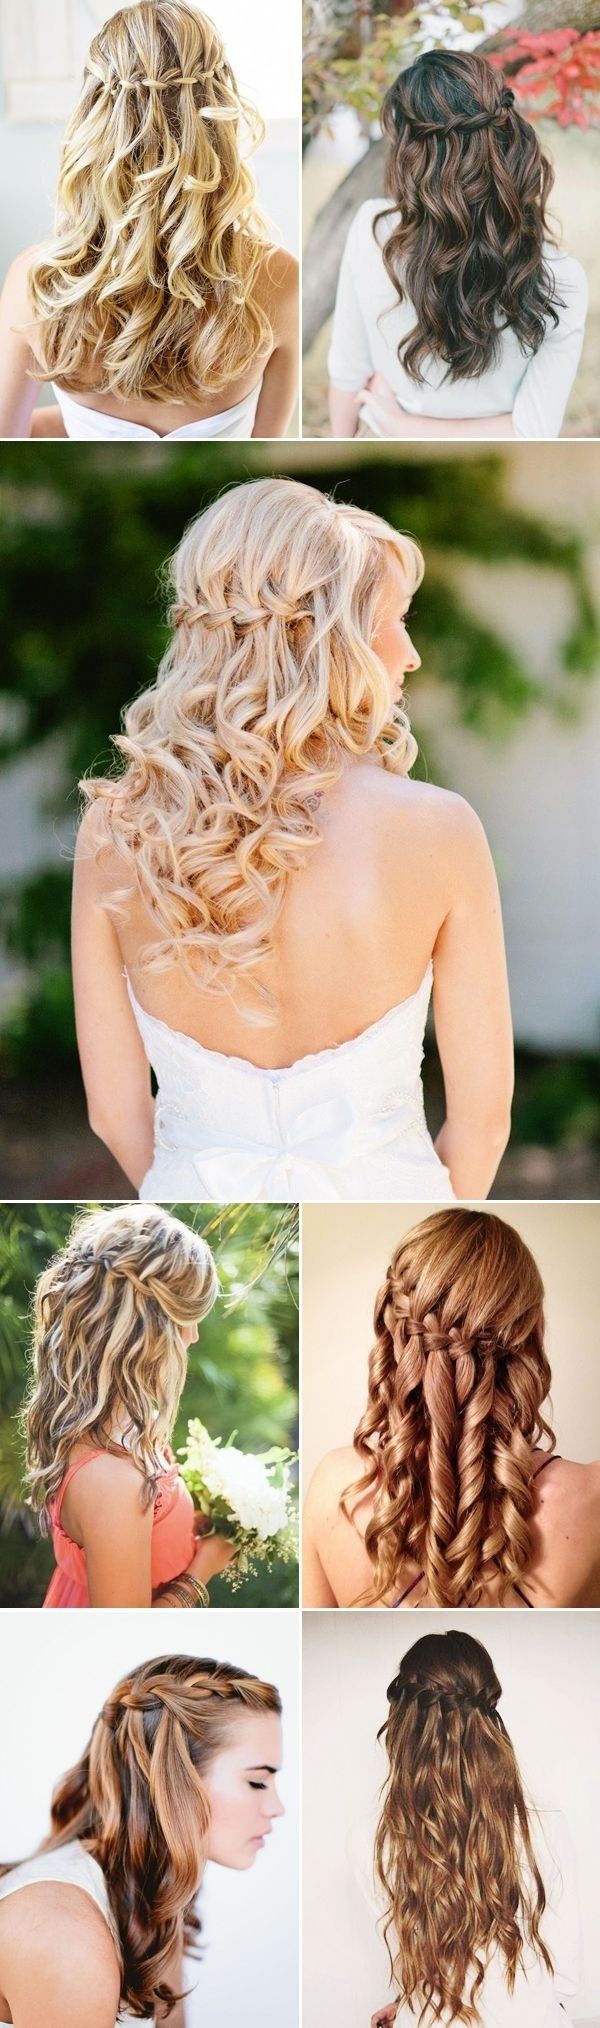 30 Hottest Bridesmaid Hairstyles For Long Hair